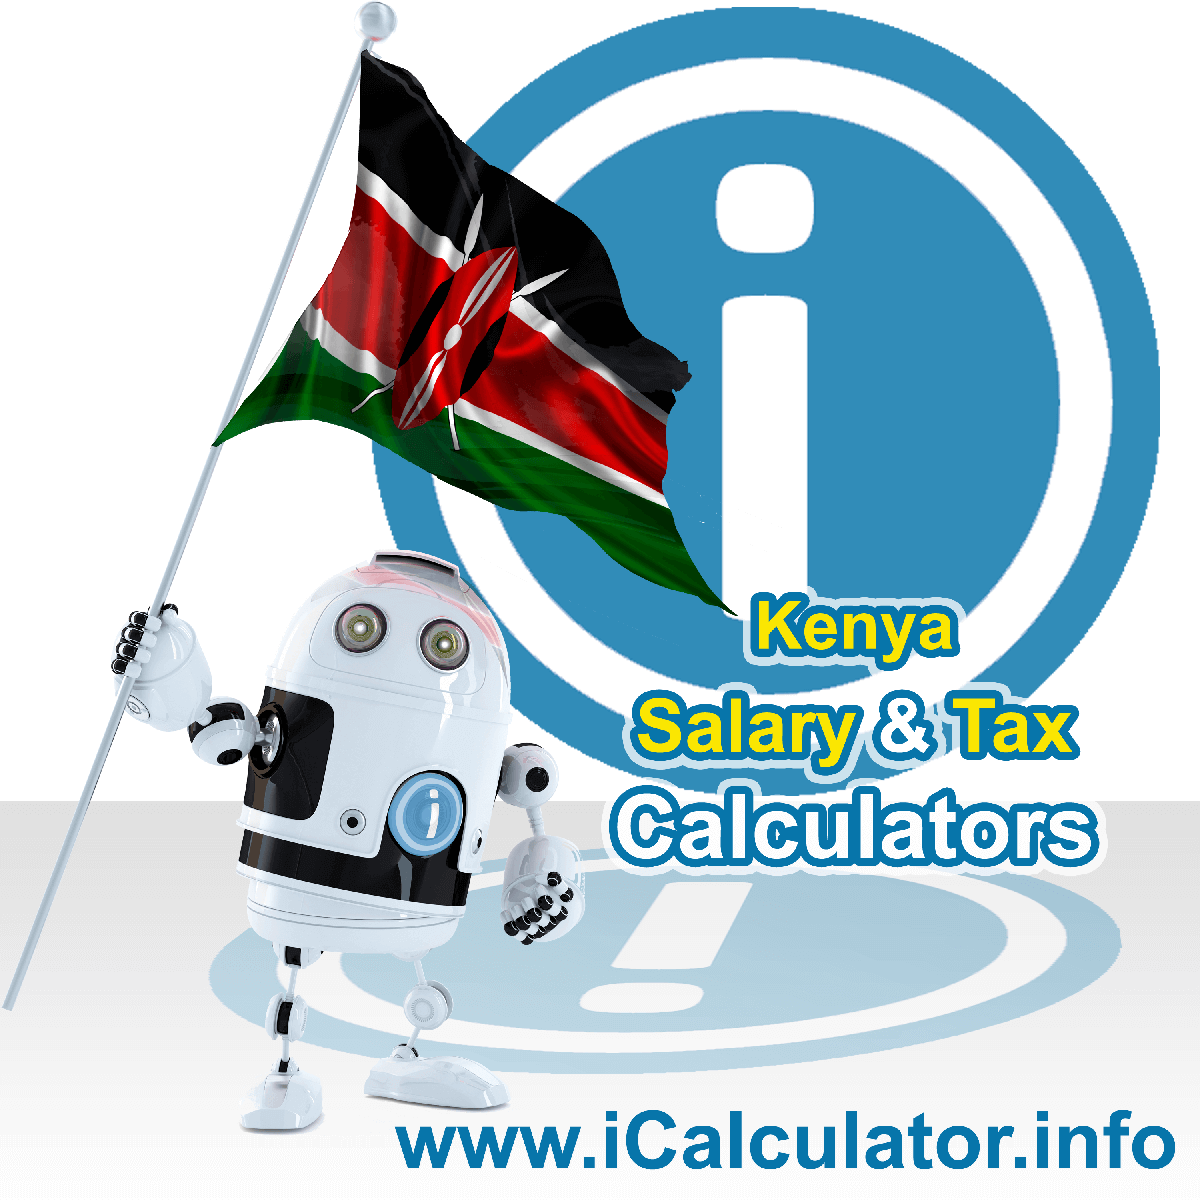 Kenya Salary Calculator. This image shows the Kenyaese flag and information relating to the tax formula for the Kenya Tax Calculator